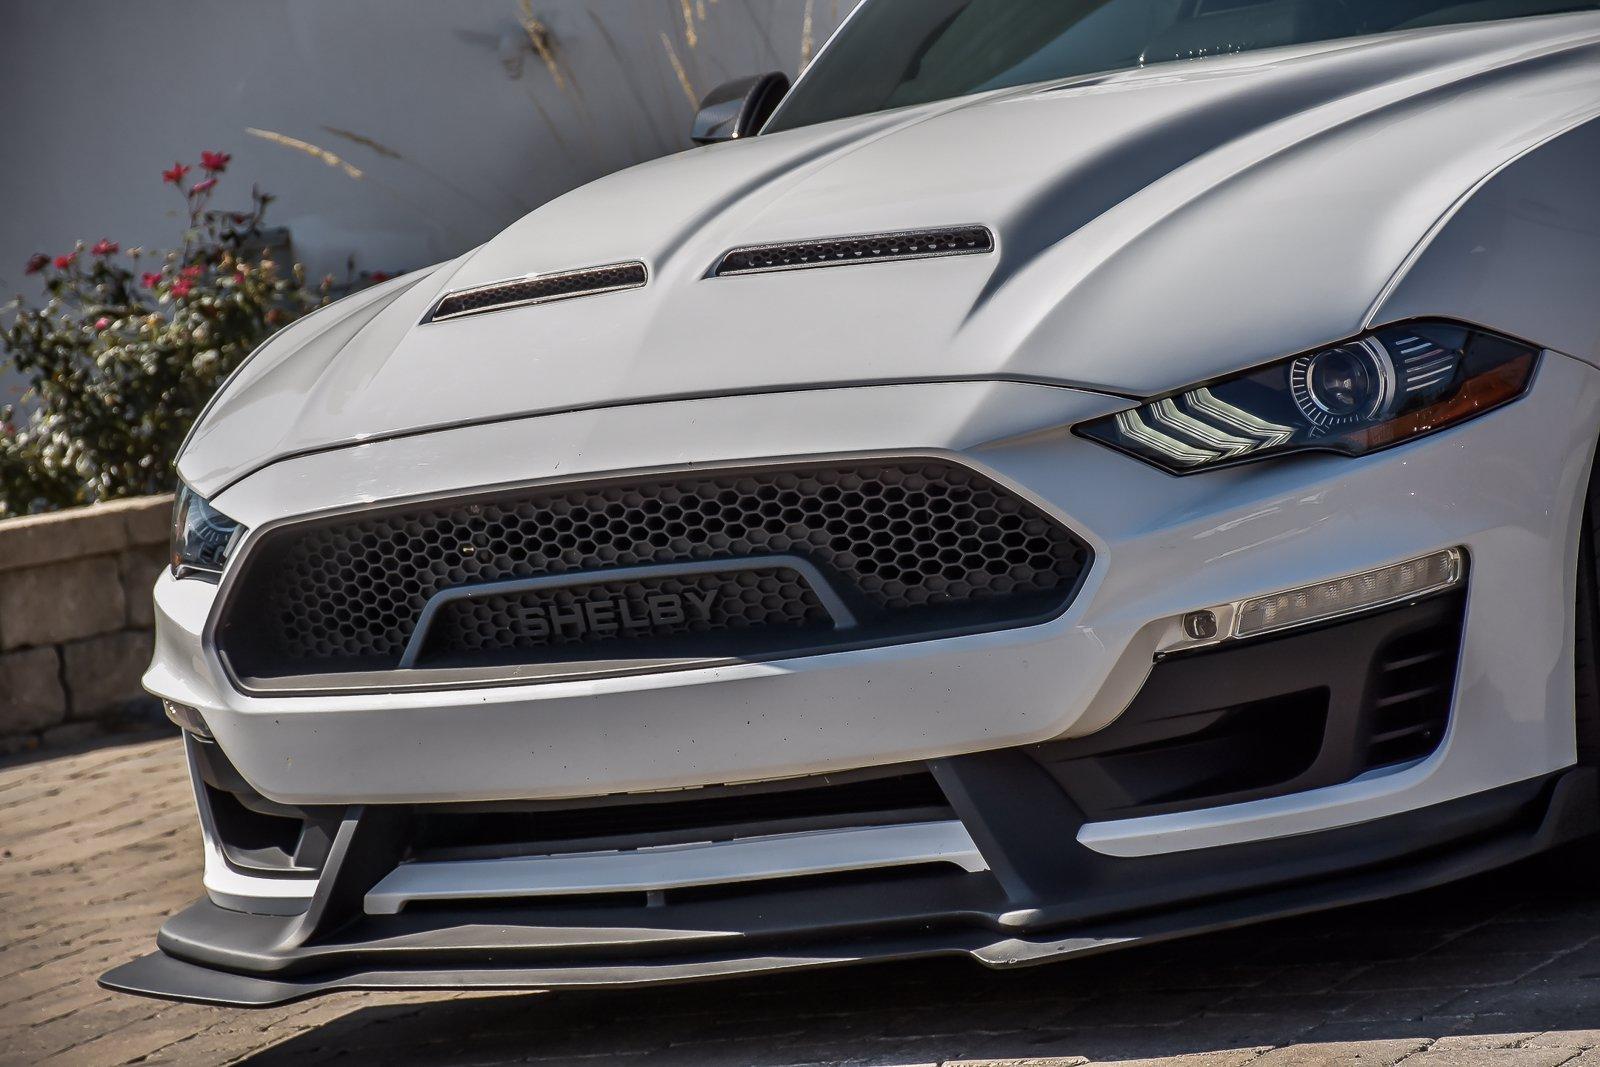 Used 2019 Ford Mustang GT Premium Shelby Super Snake With Navigation | Downers Grove, IL